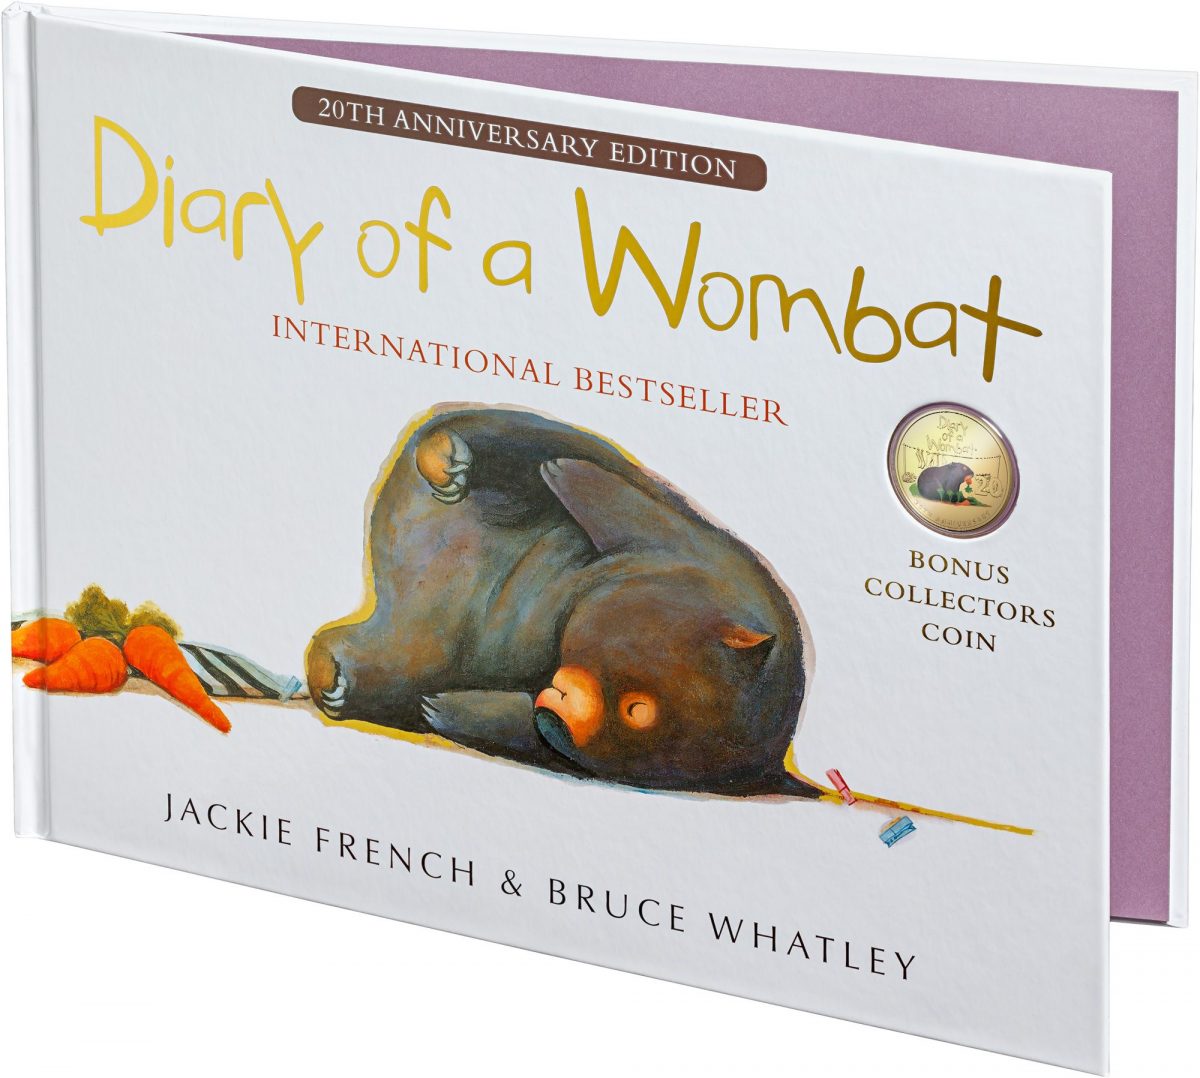 Diary of a Wombat book